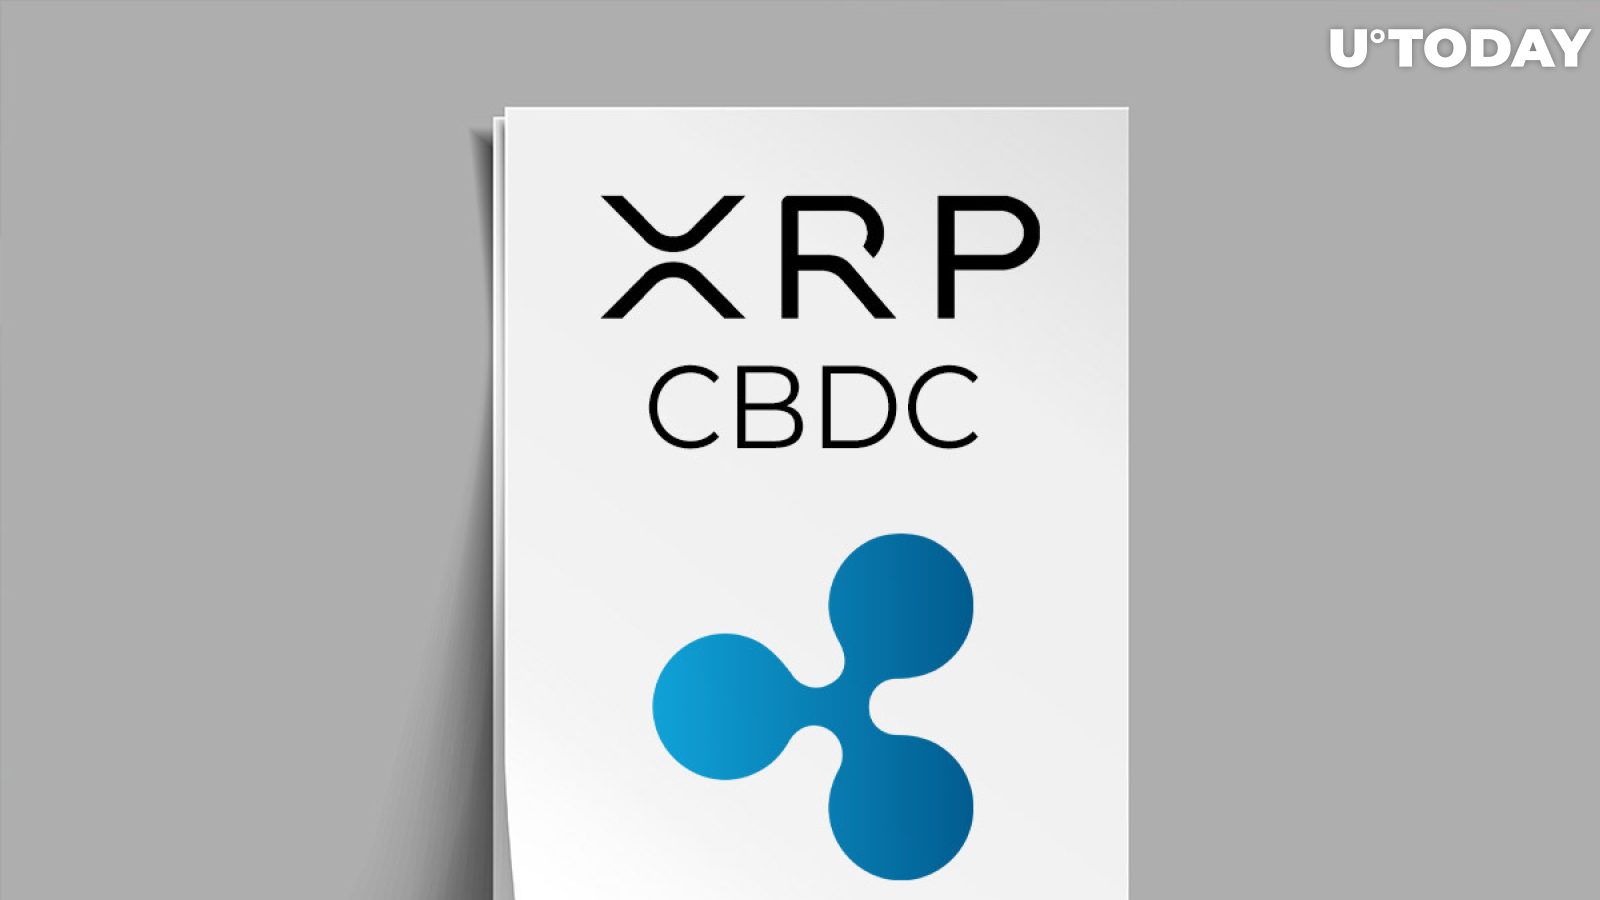 Ripple Pitches XRP as Bridge Currency for CBDCs in New White Paper